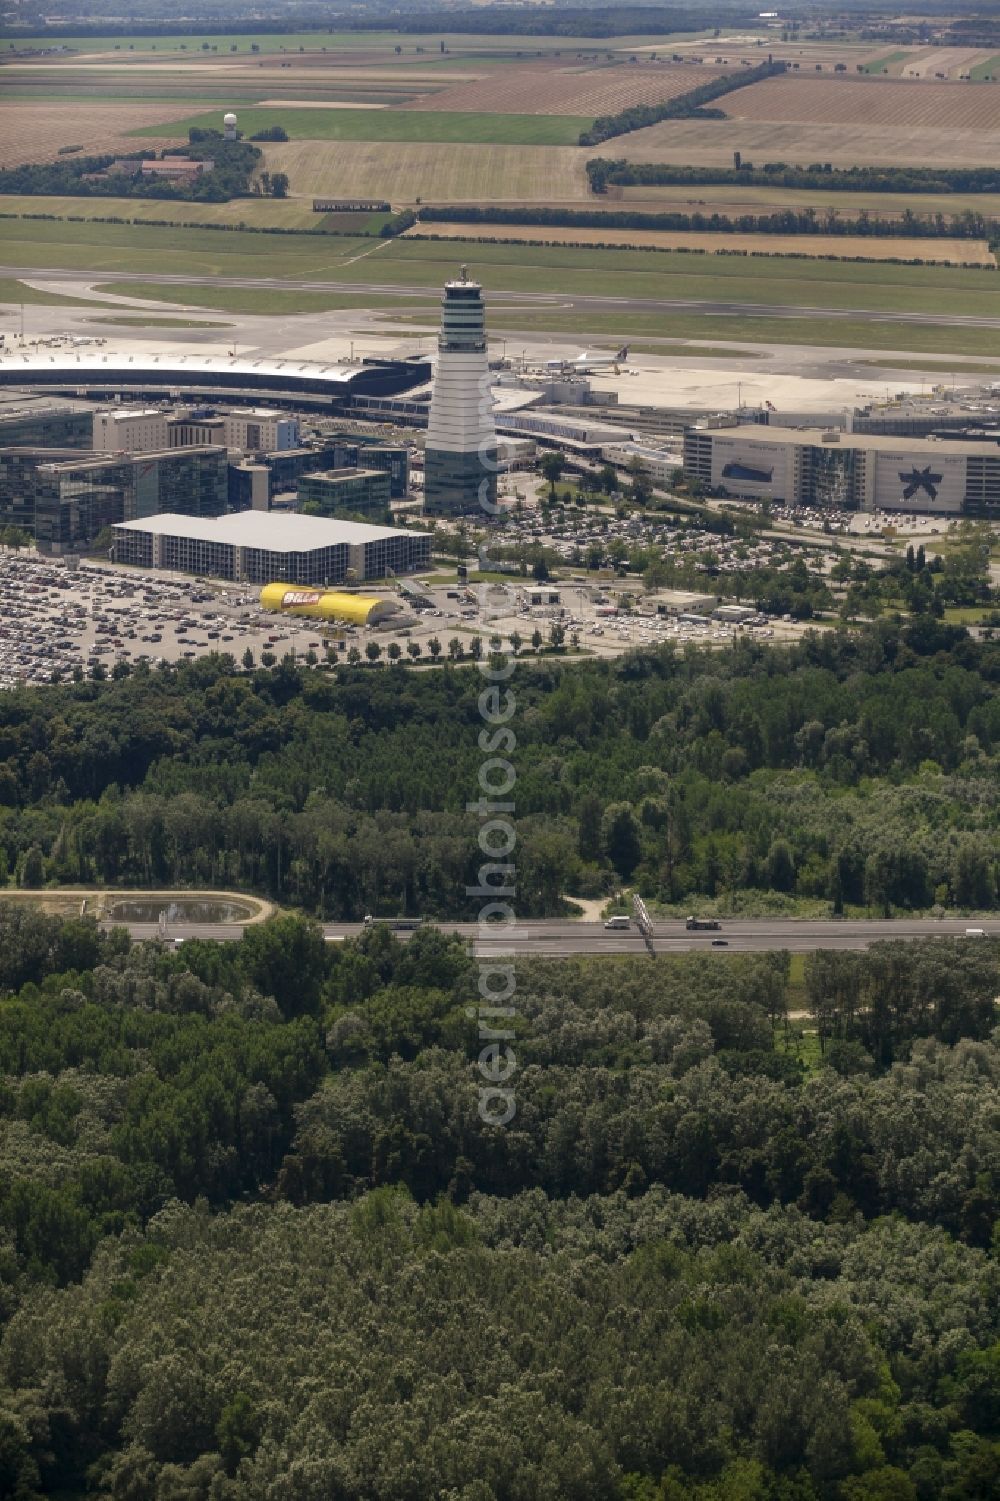 Aerial image Schwechat - Tower and terminals on the premises of Vienna International Airport in Schwechat in Lower Austria, Austria